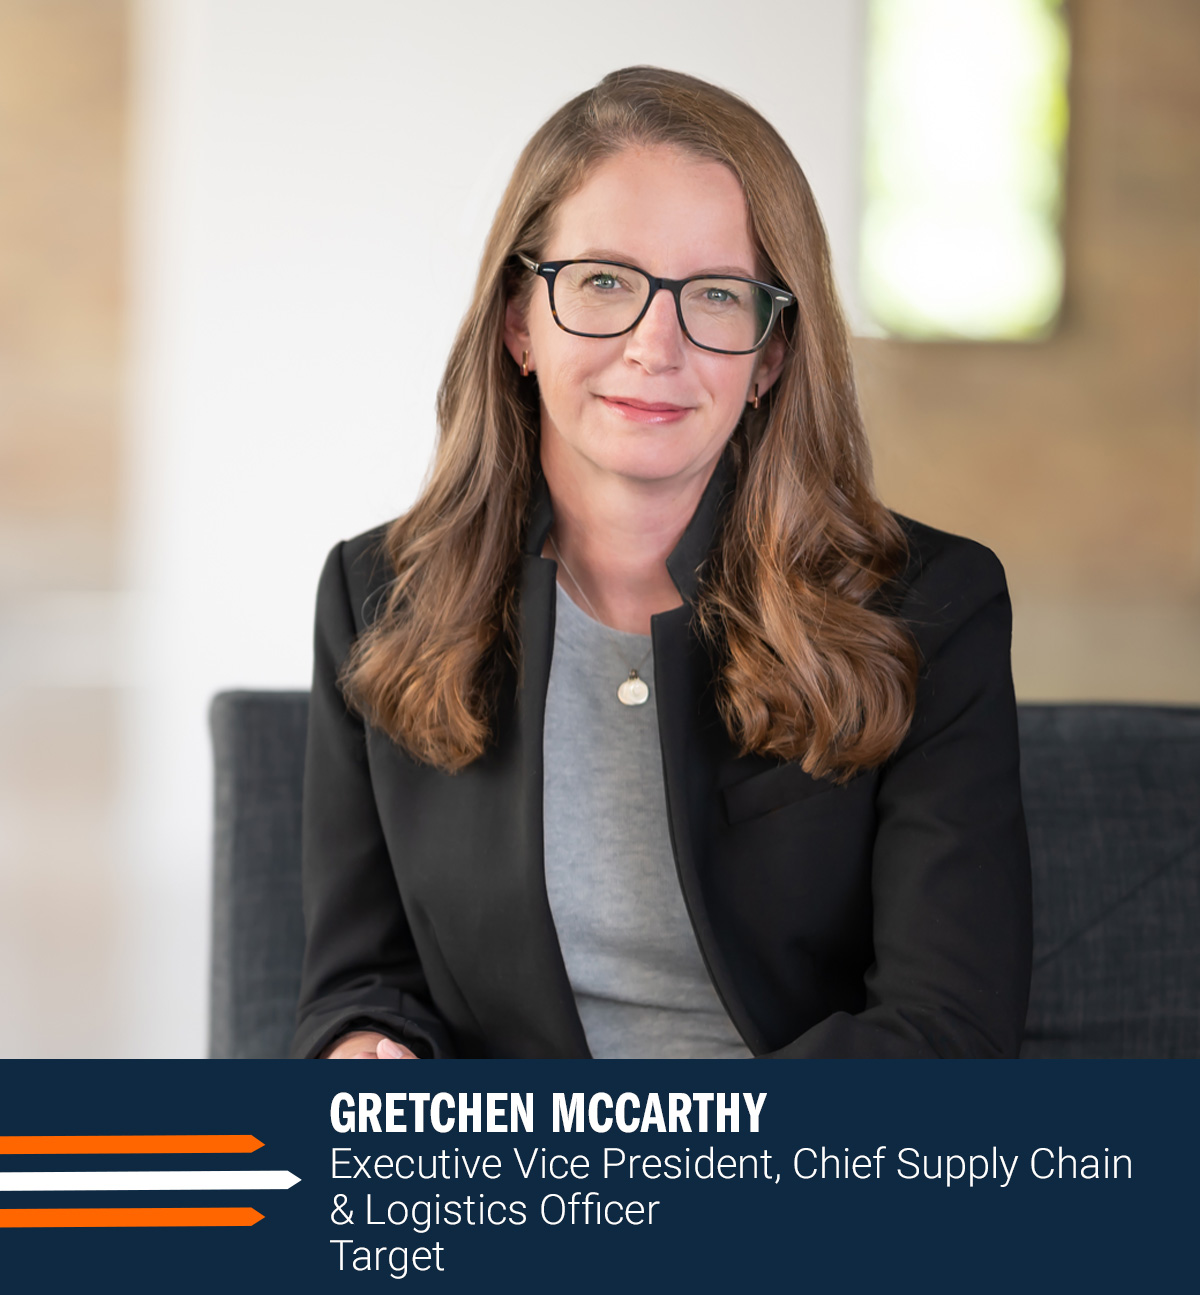 Gretchen McCarthy Executive Vice President, Chief Supply Chain & Logistics Officer Target